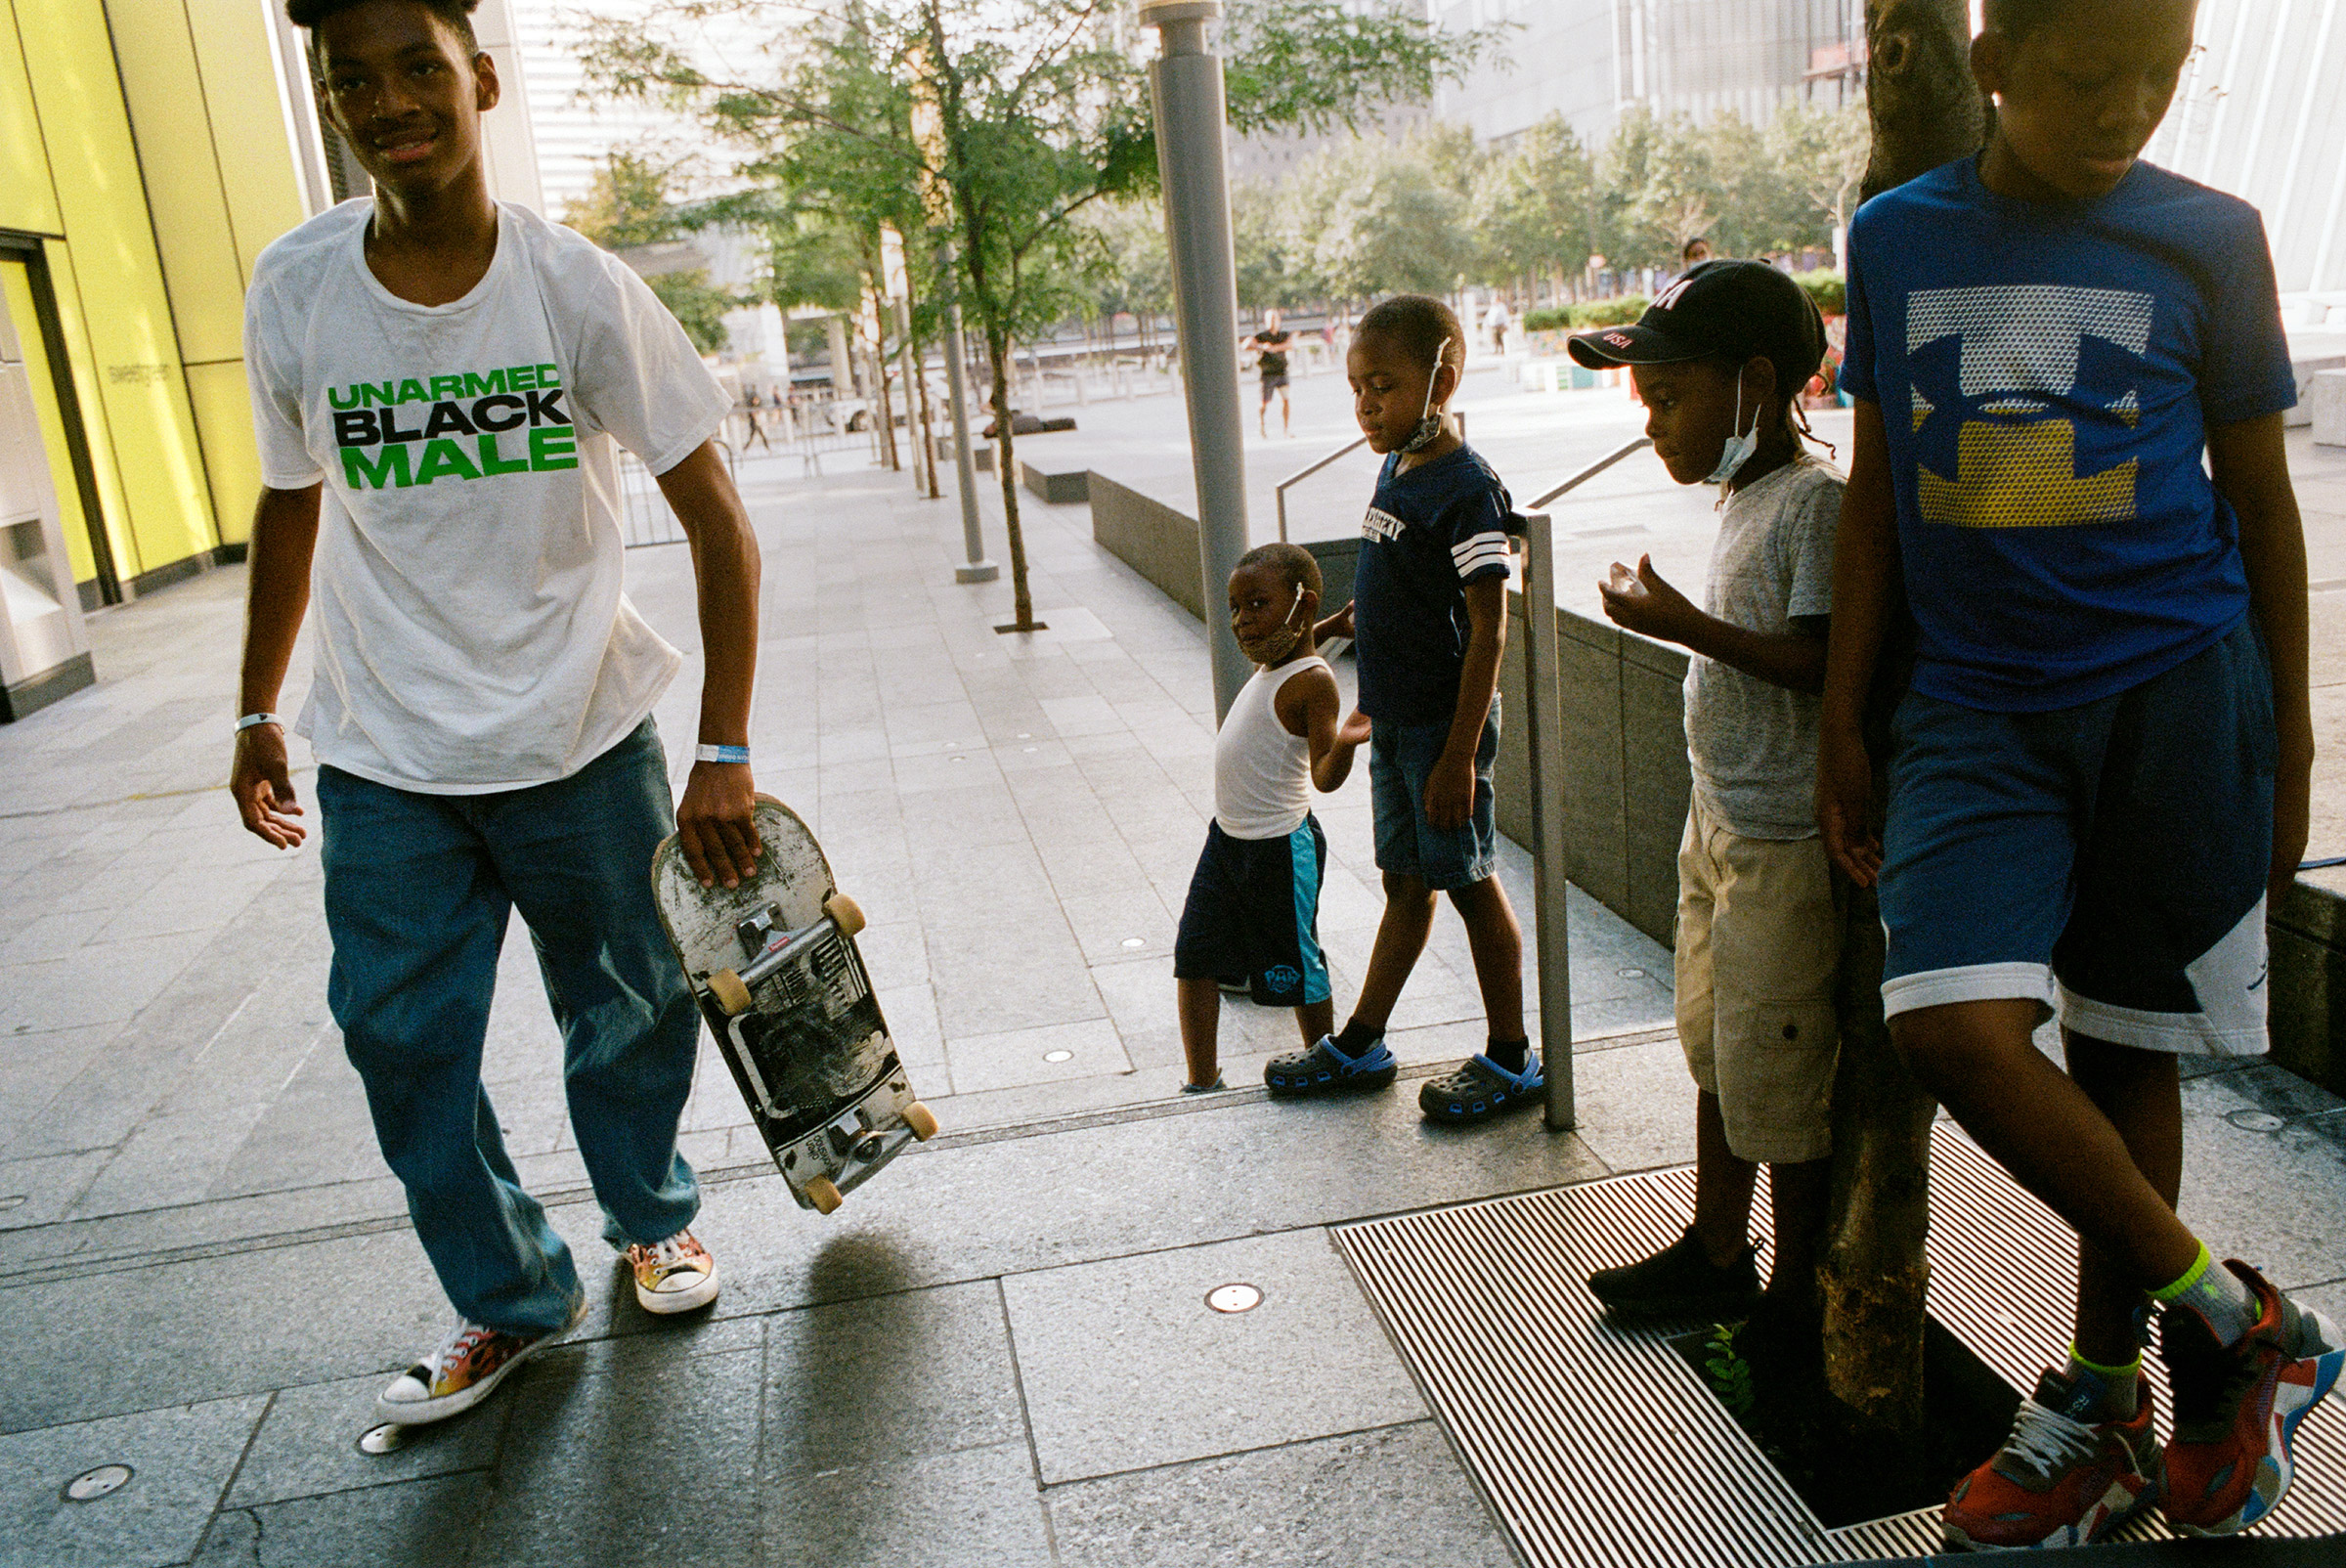 New York, NY - 8/26/21 - A gaggle of enthusiastic spectators plays it cool as the skater they've been applauding walks by.